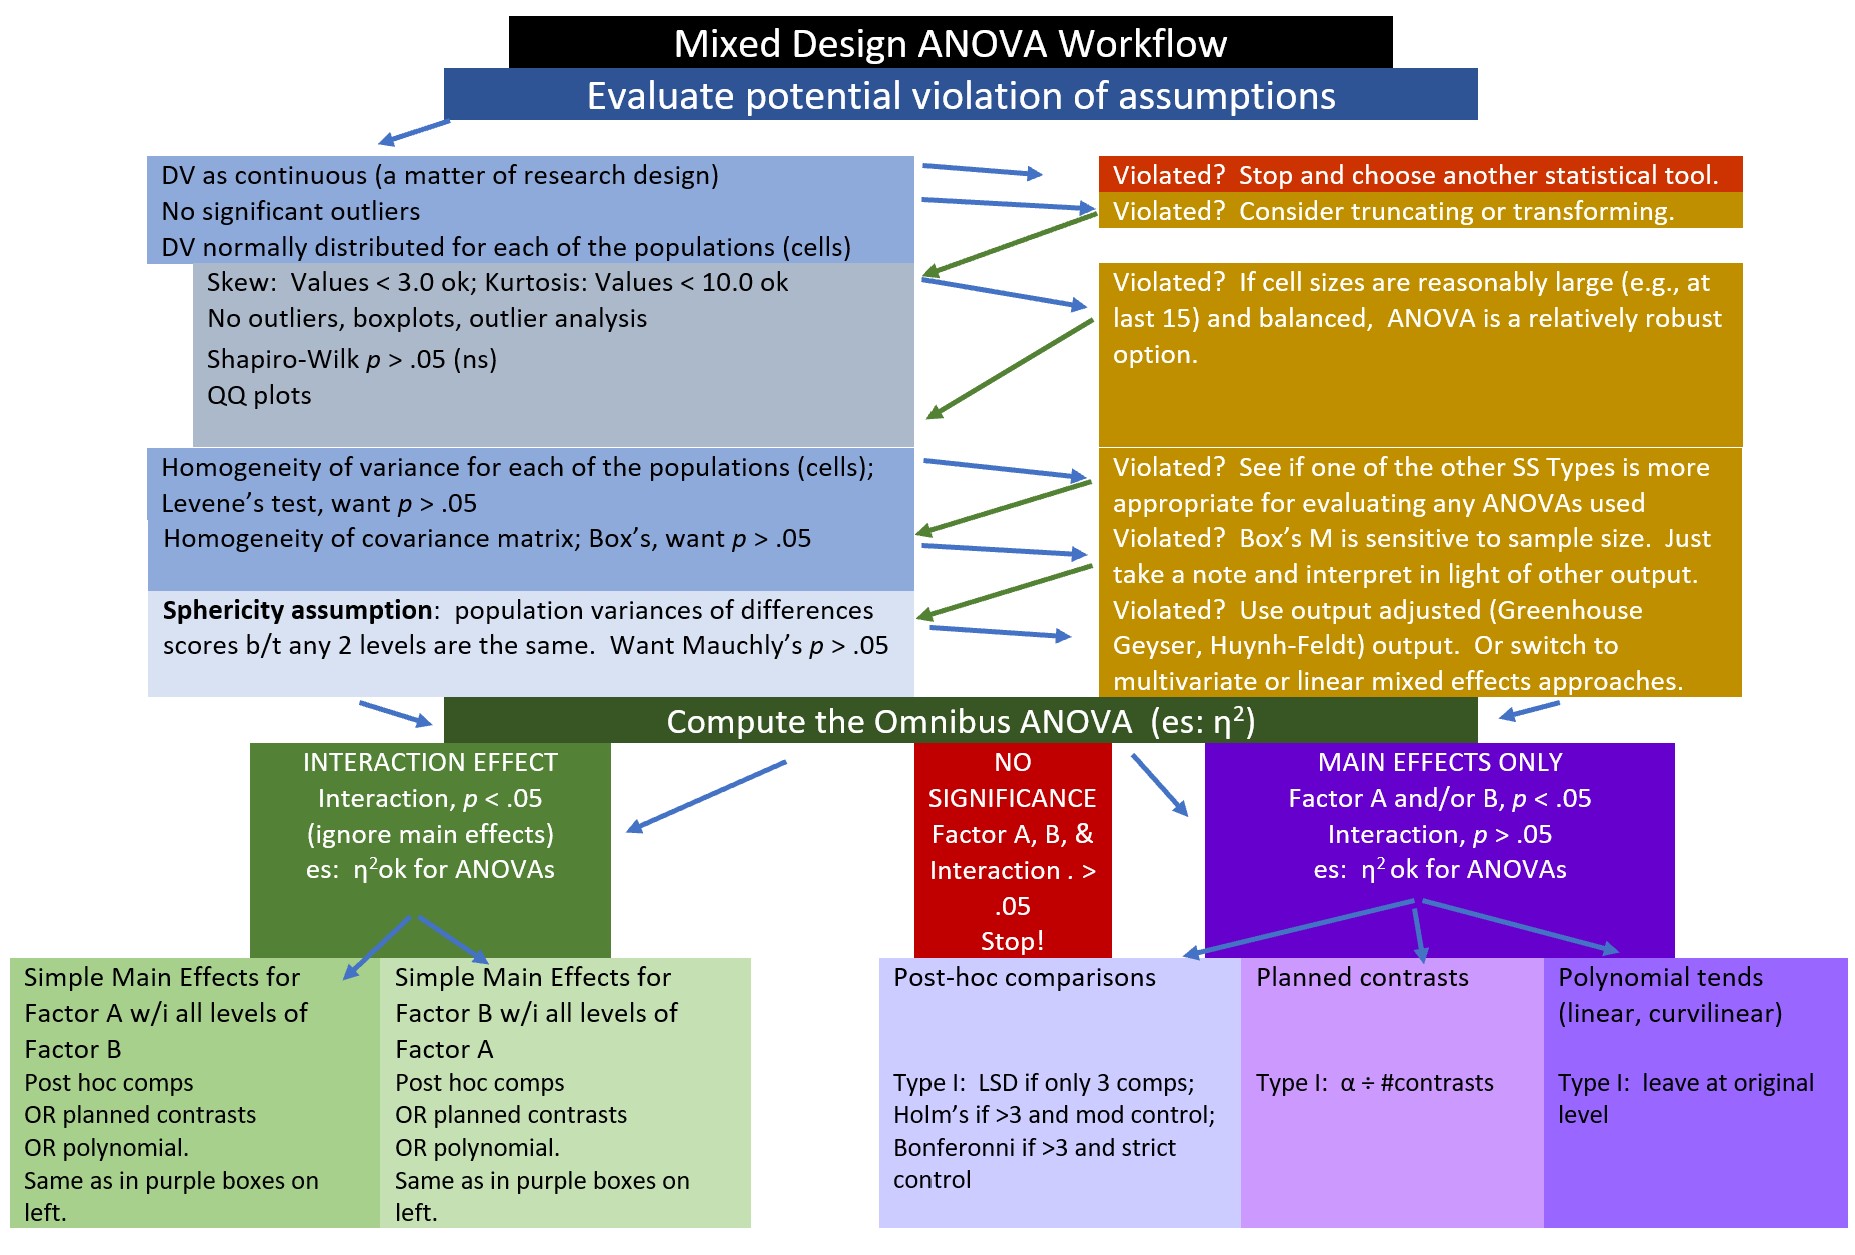 Image of a workflow for mixed design ANOVA